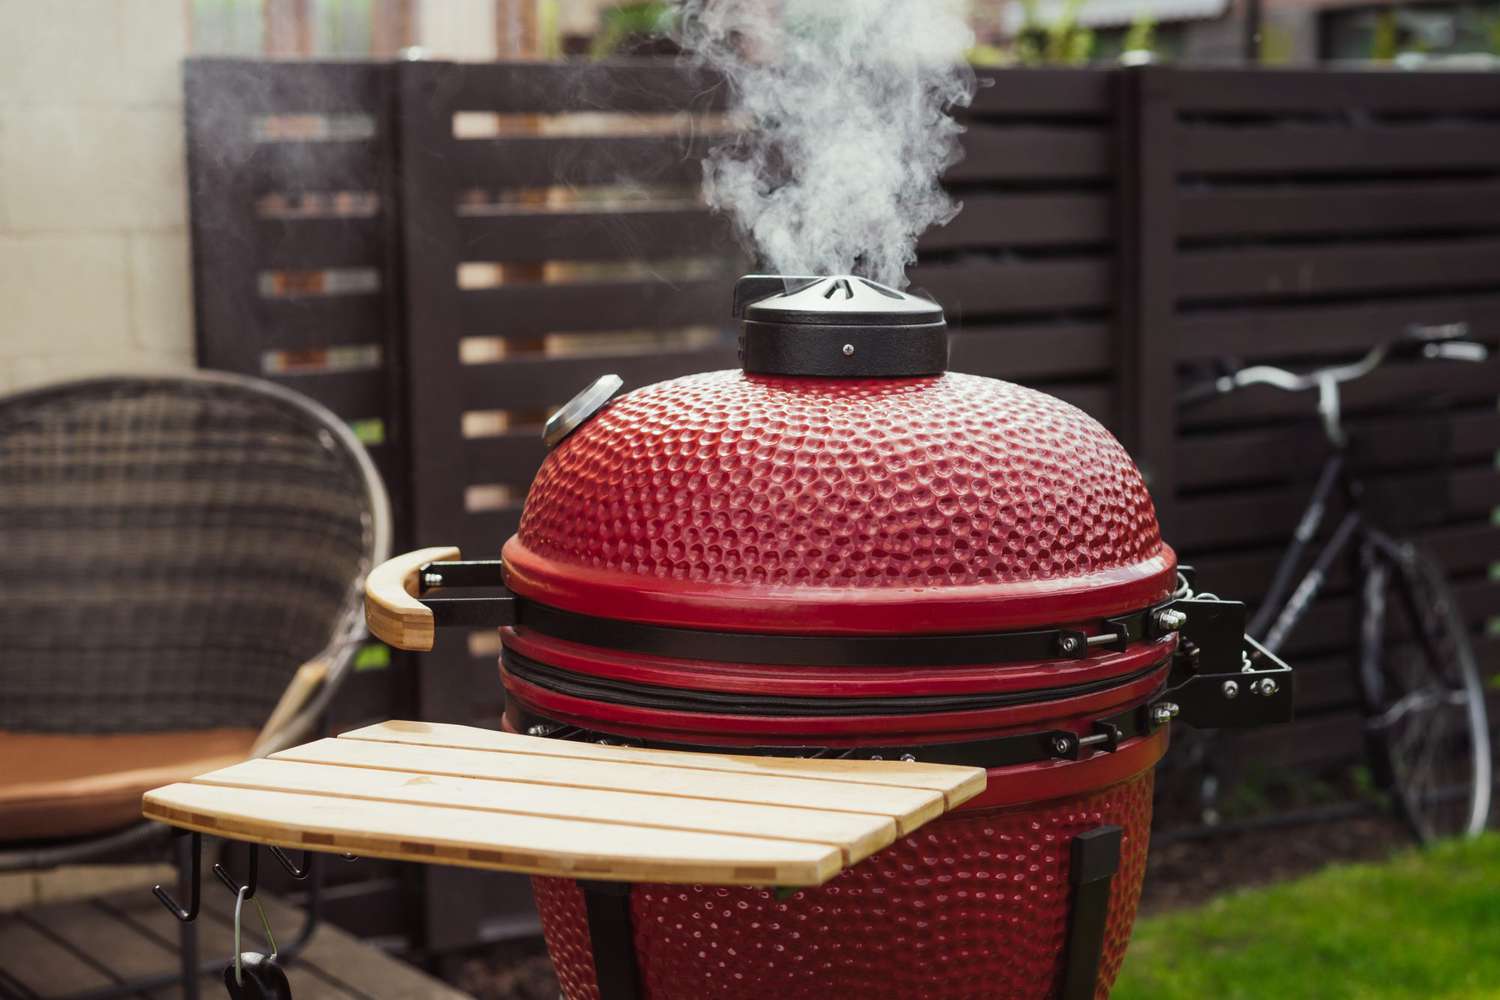 Red Ceramic Barbecue Grill. Grilling, Smoking, Baking, BBQ and Roasting process. Bicycle in the backstage of summer terrace. Lifestyle concept.